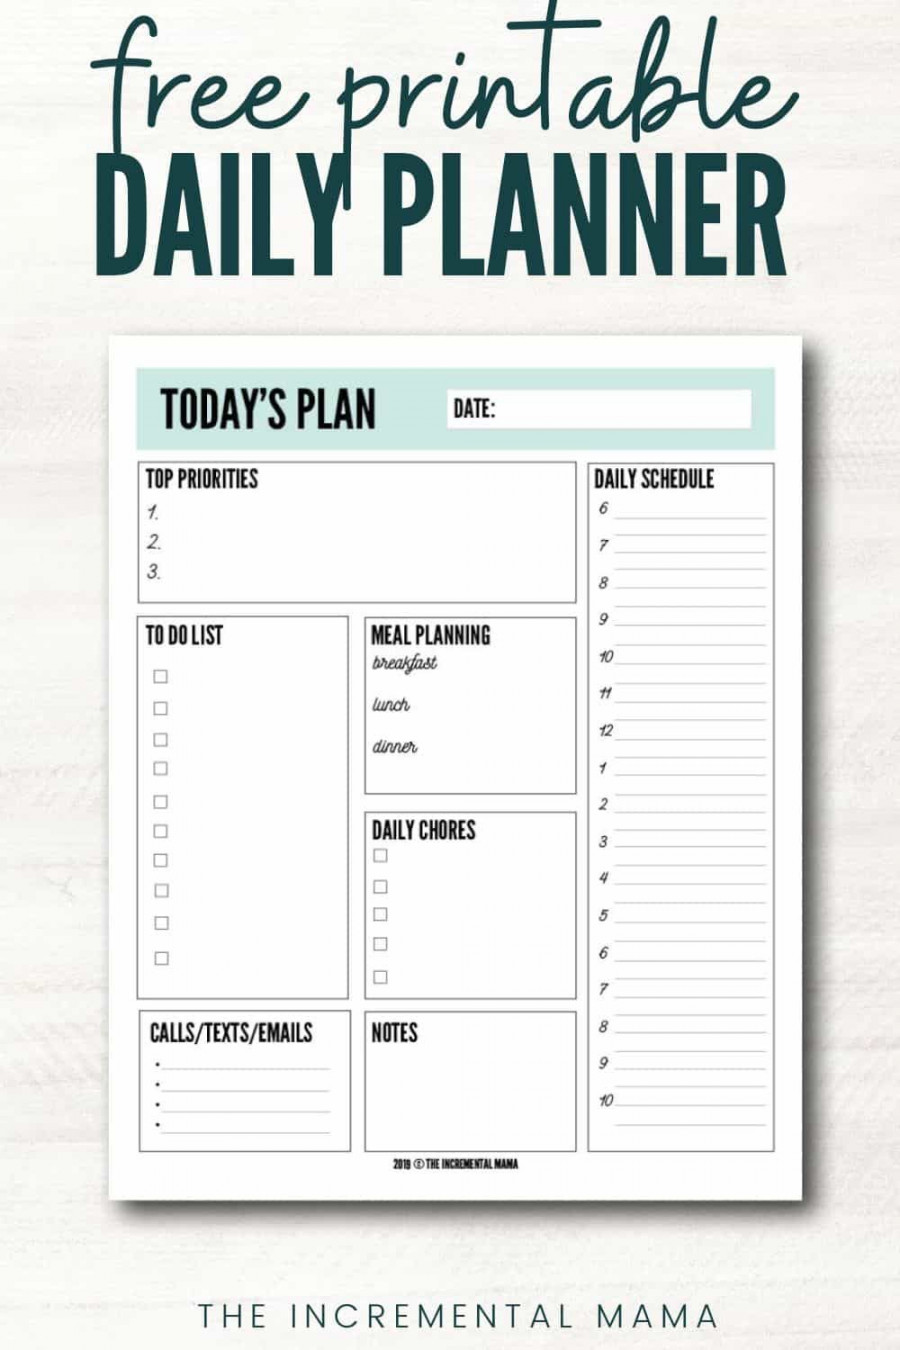 Free Printable Daily Planner Template to Get More Done  Daily